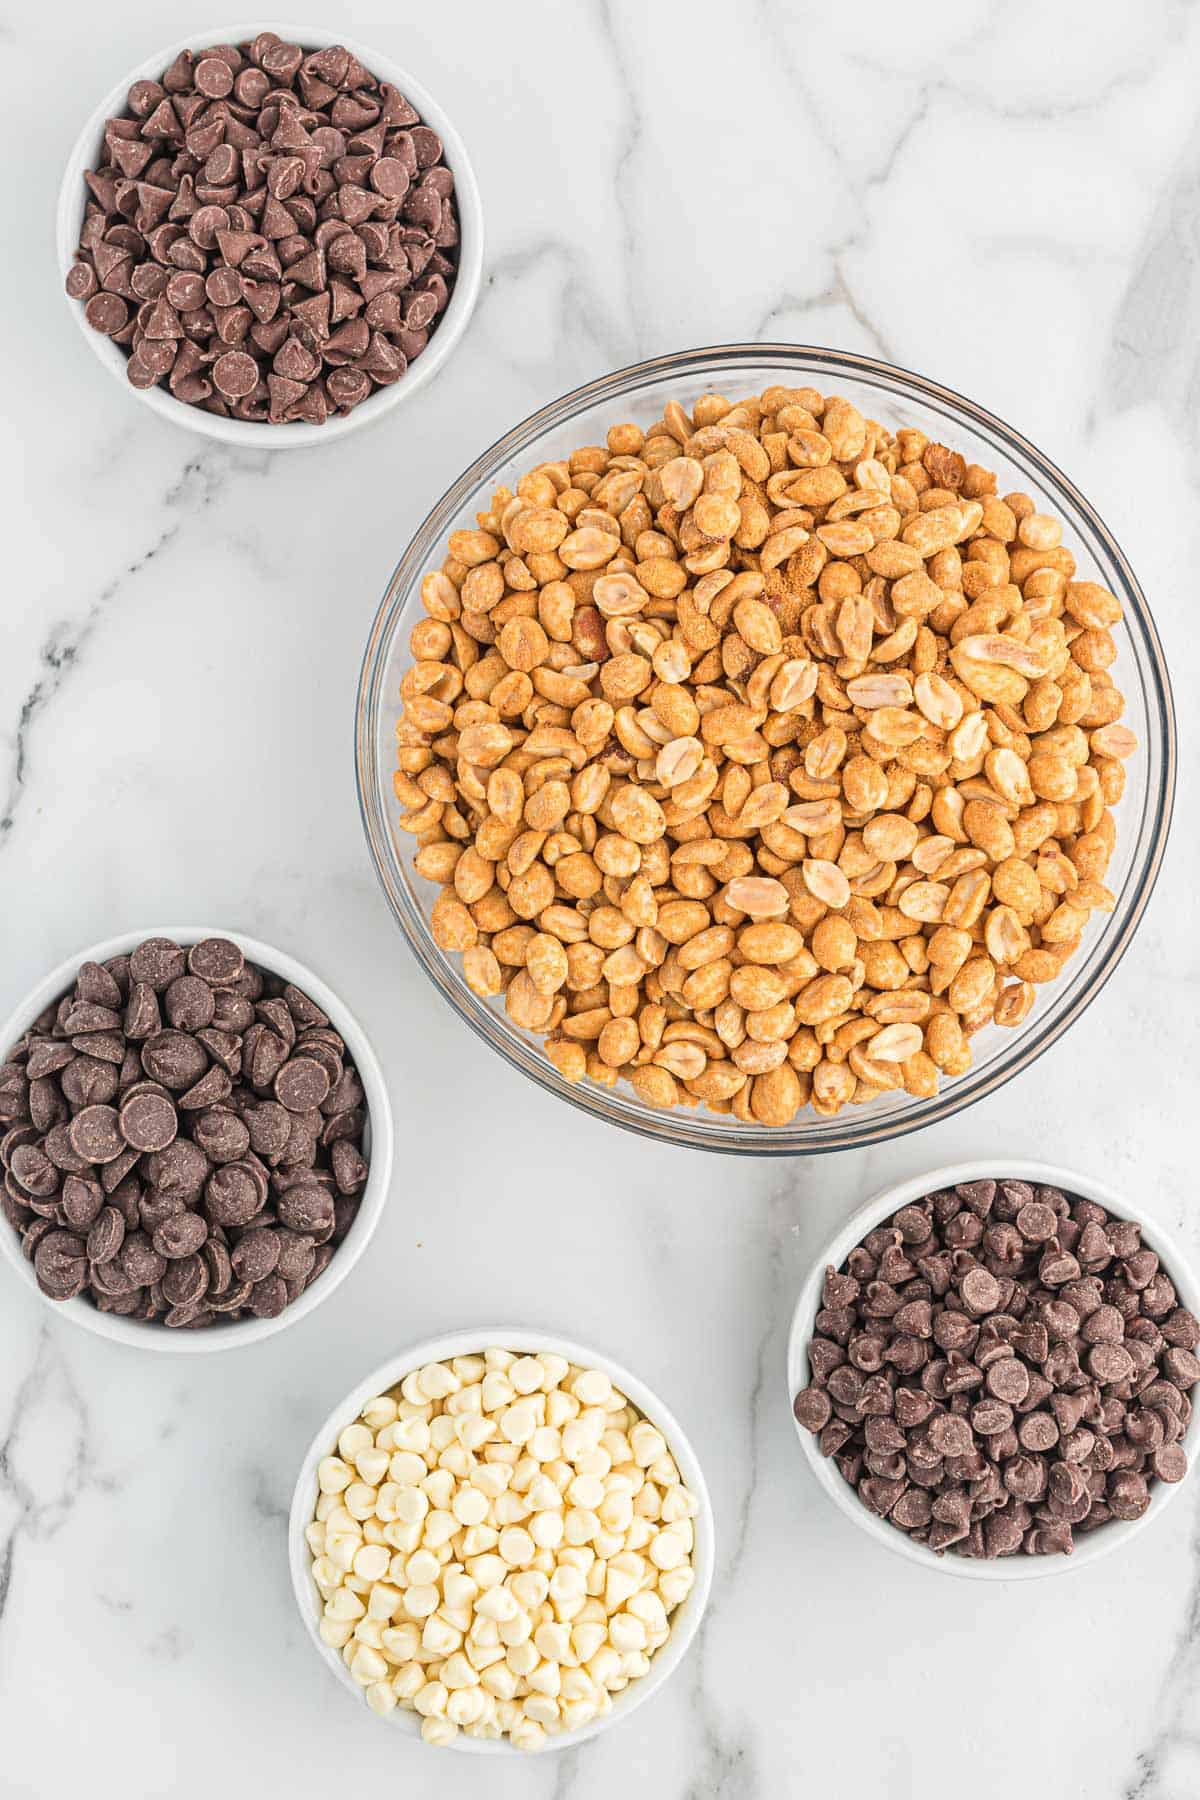 peanuts and chocolate chips